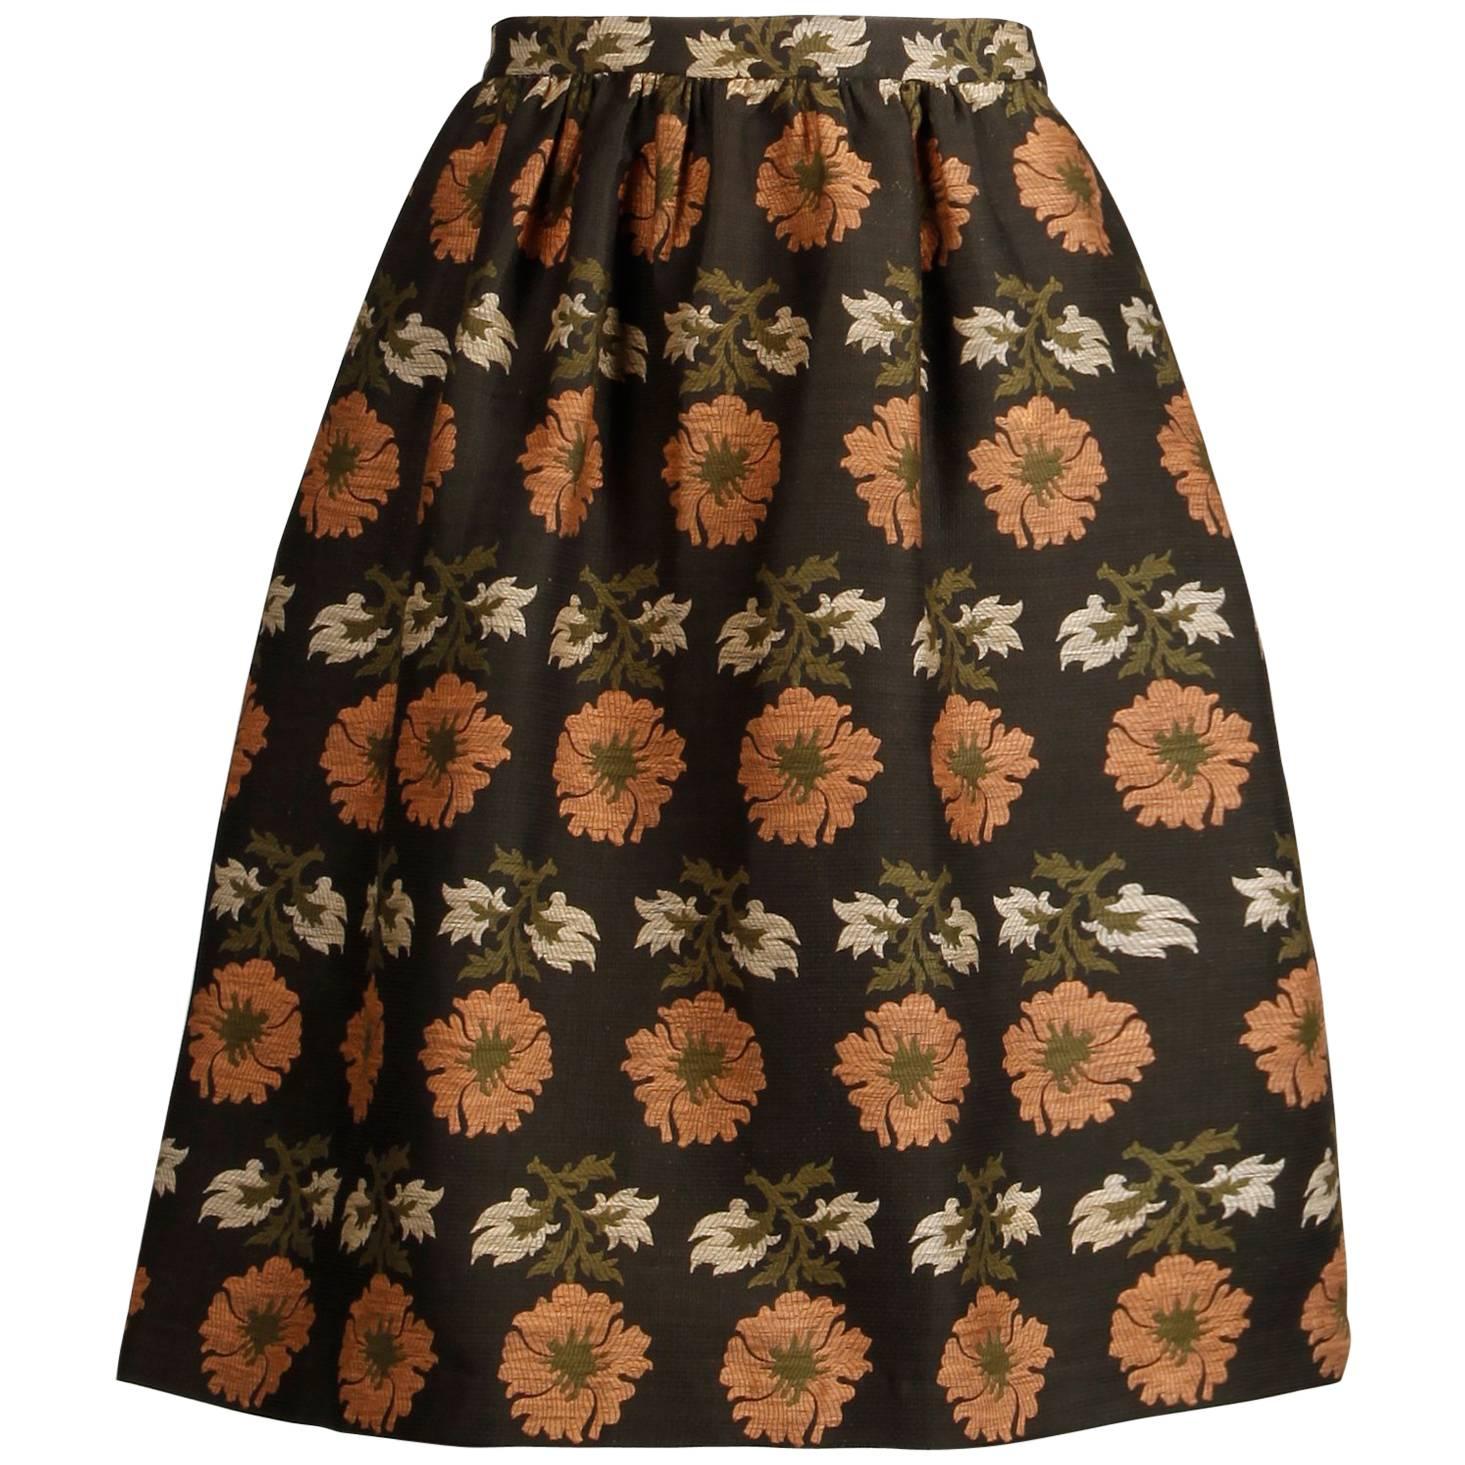 1960s Vintage Silk Jacquard Woven Floral Tapestry Skirt in Brown, Coral + Green